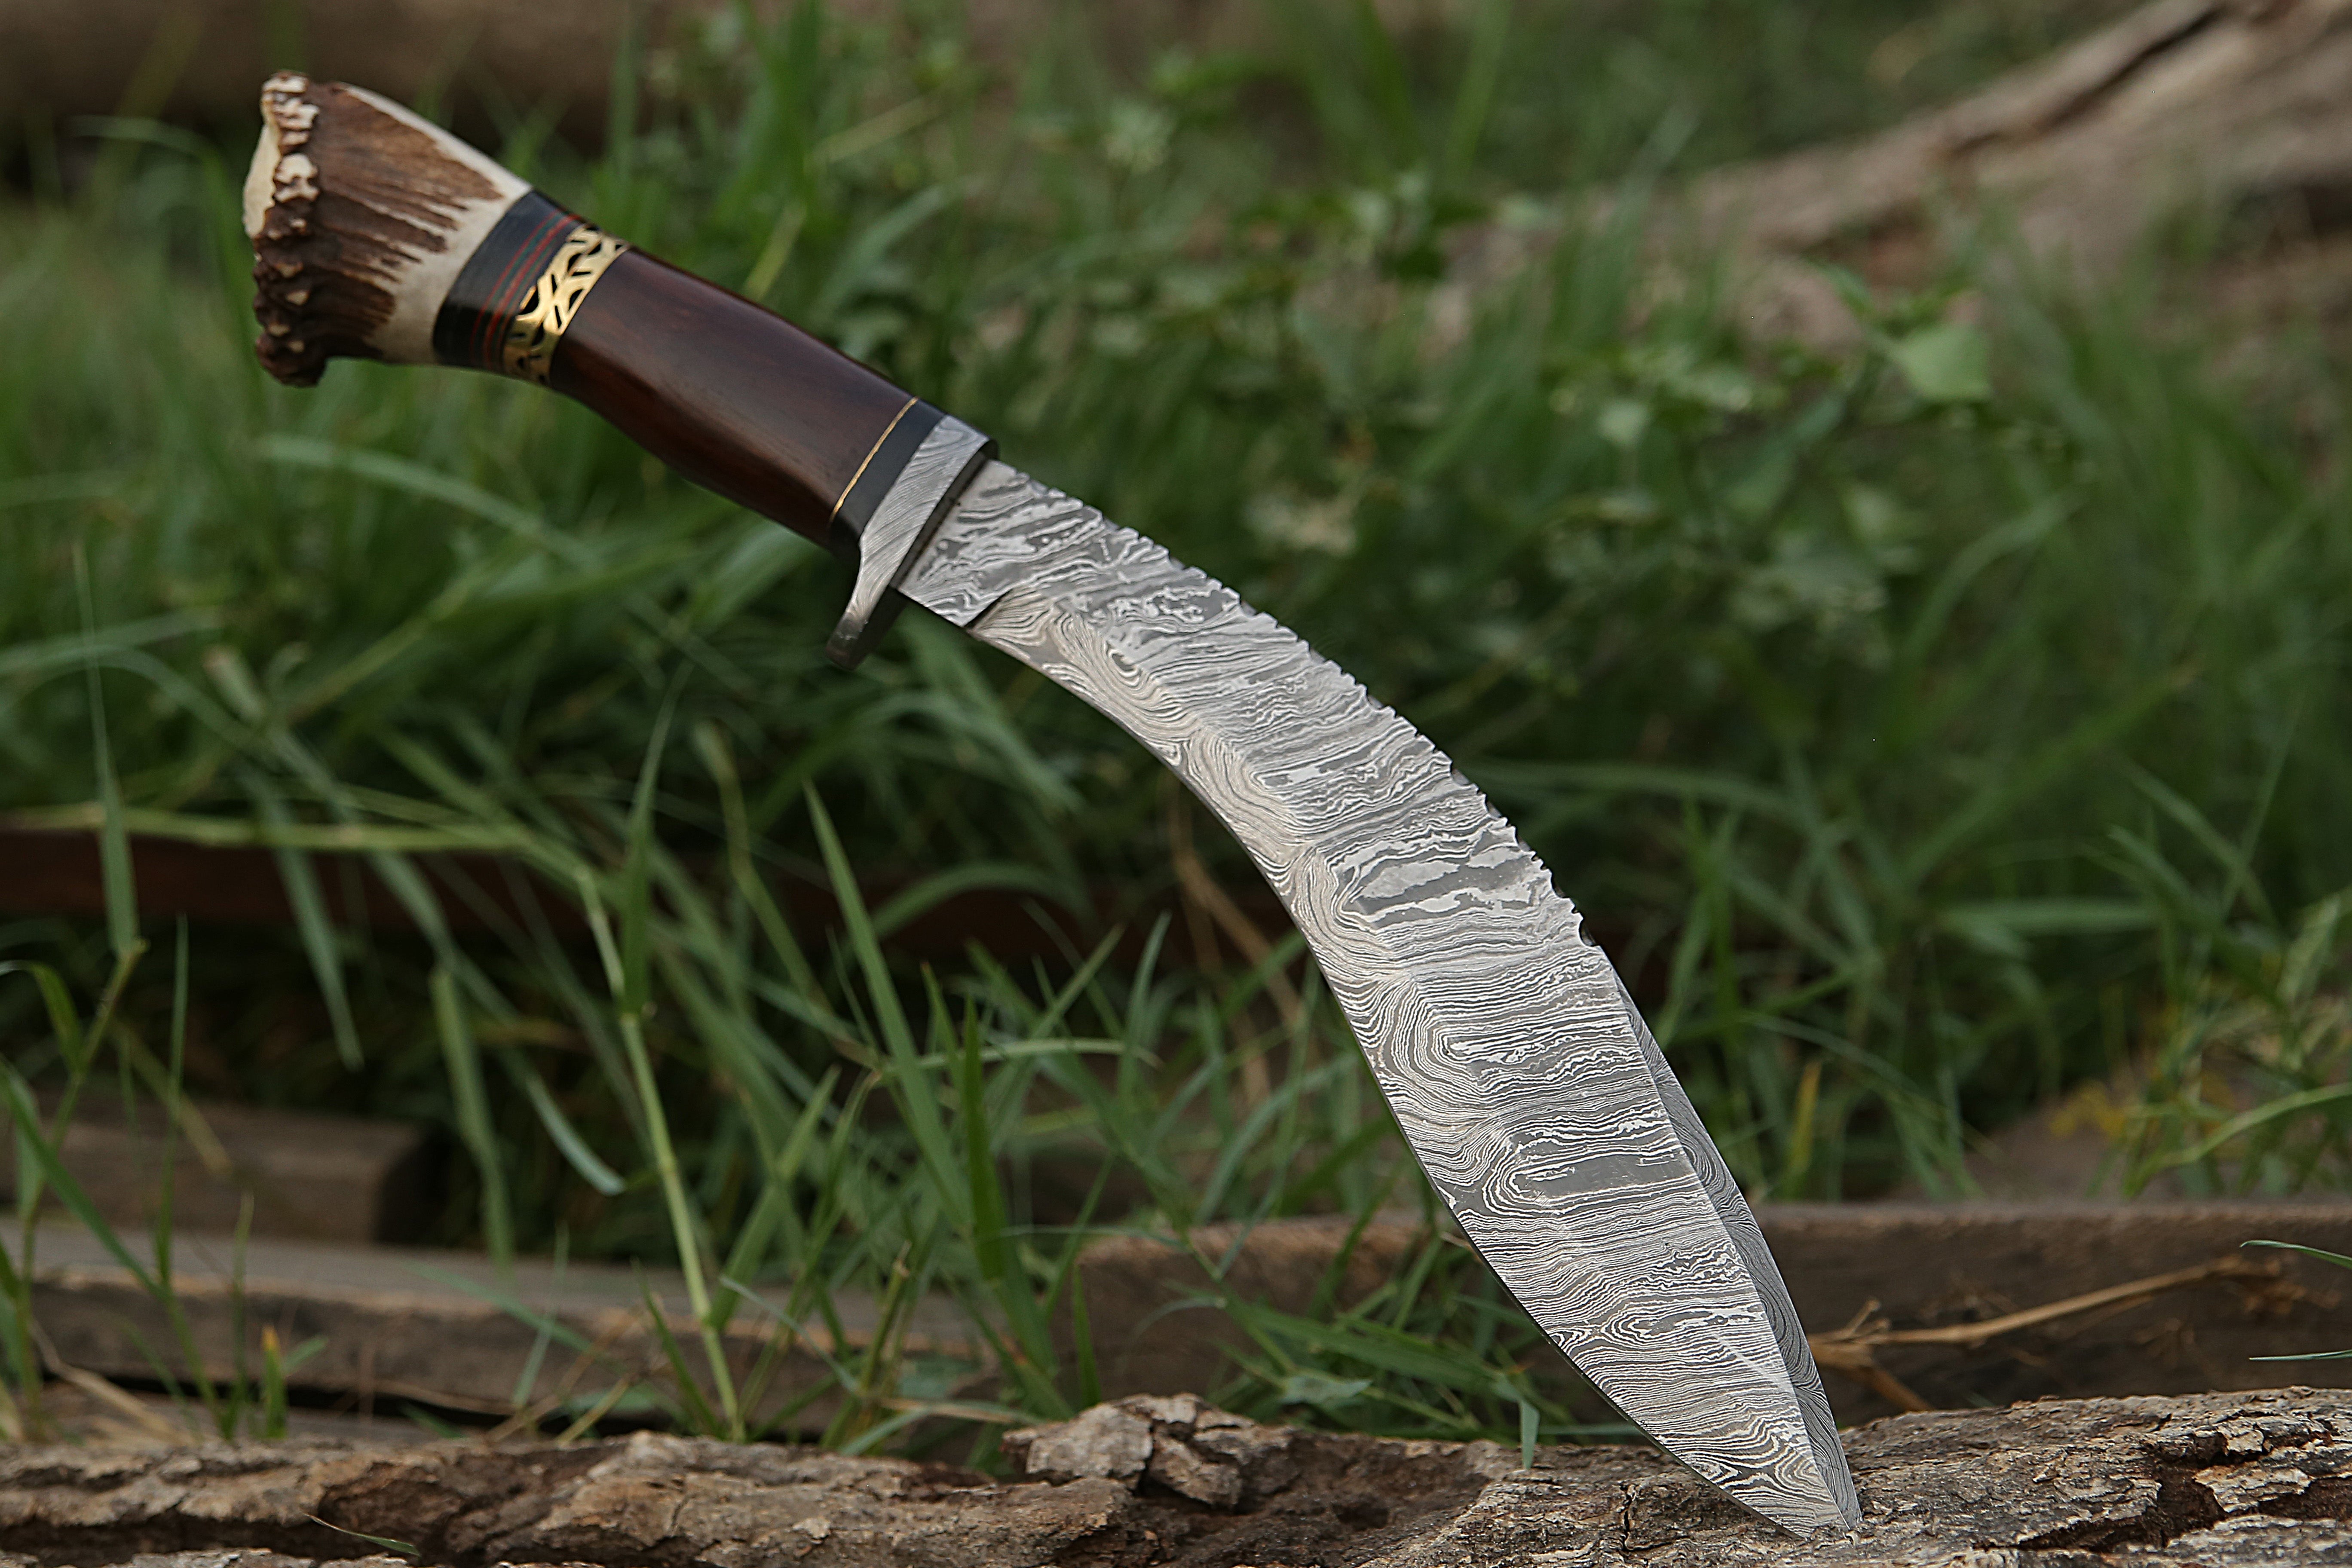 Why are Damascus Knives Expensive?